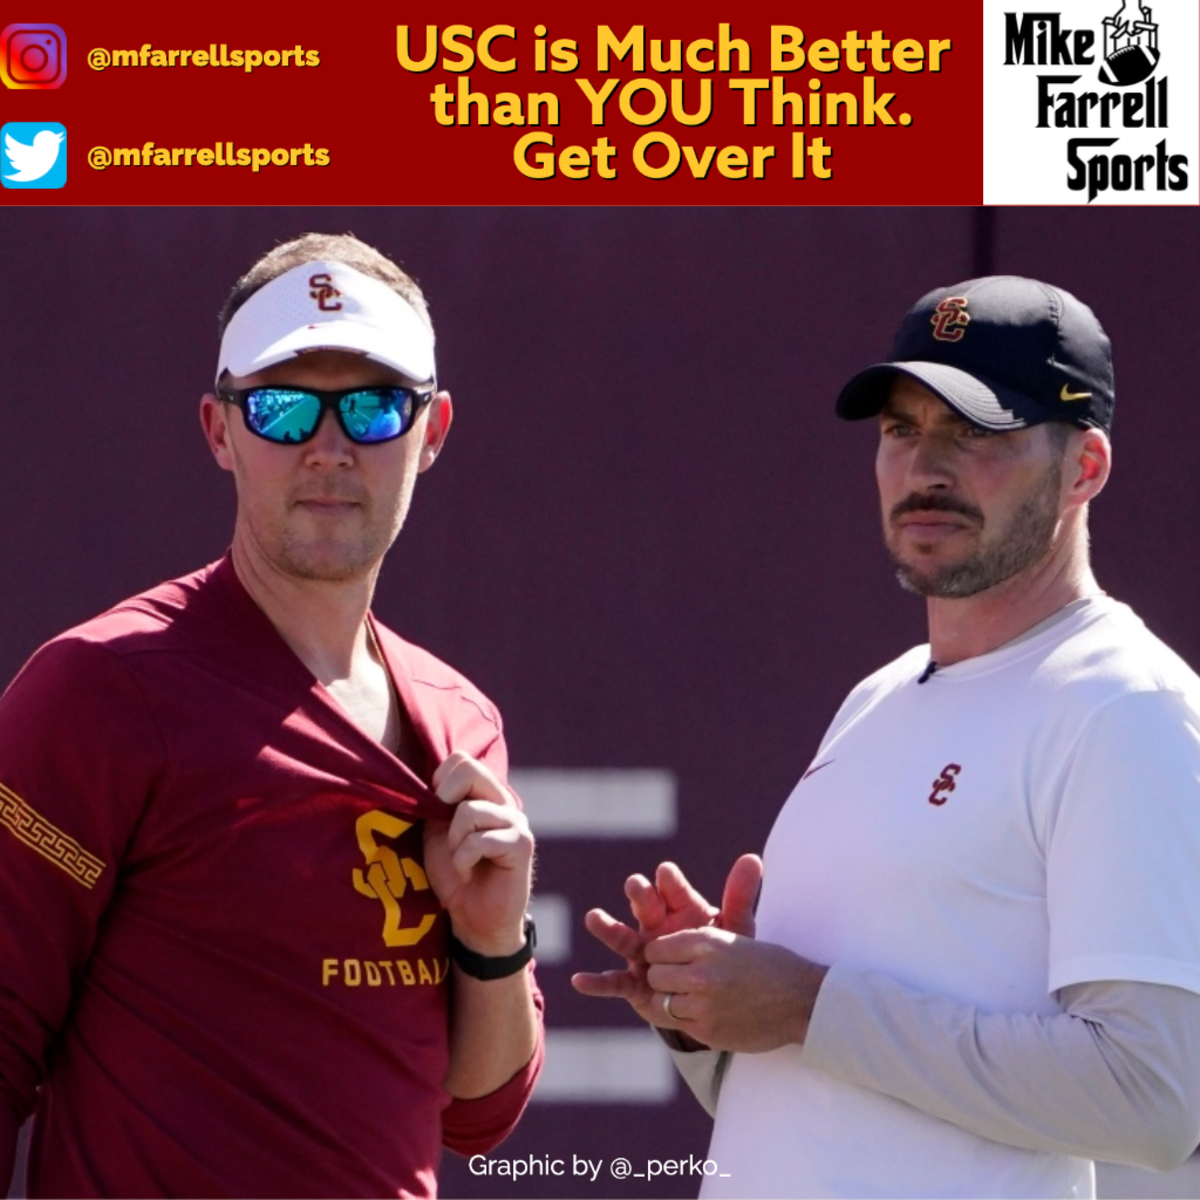 USC is Better than You Think